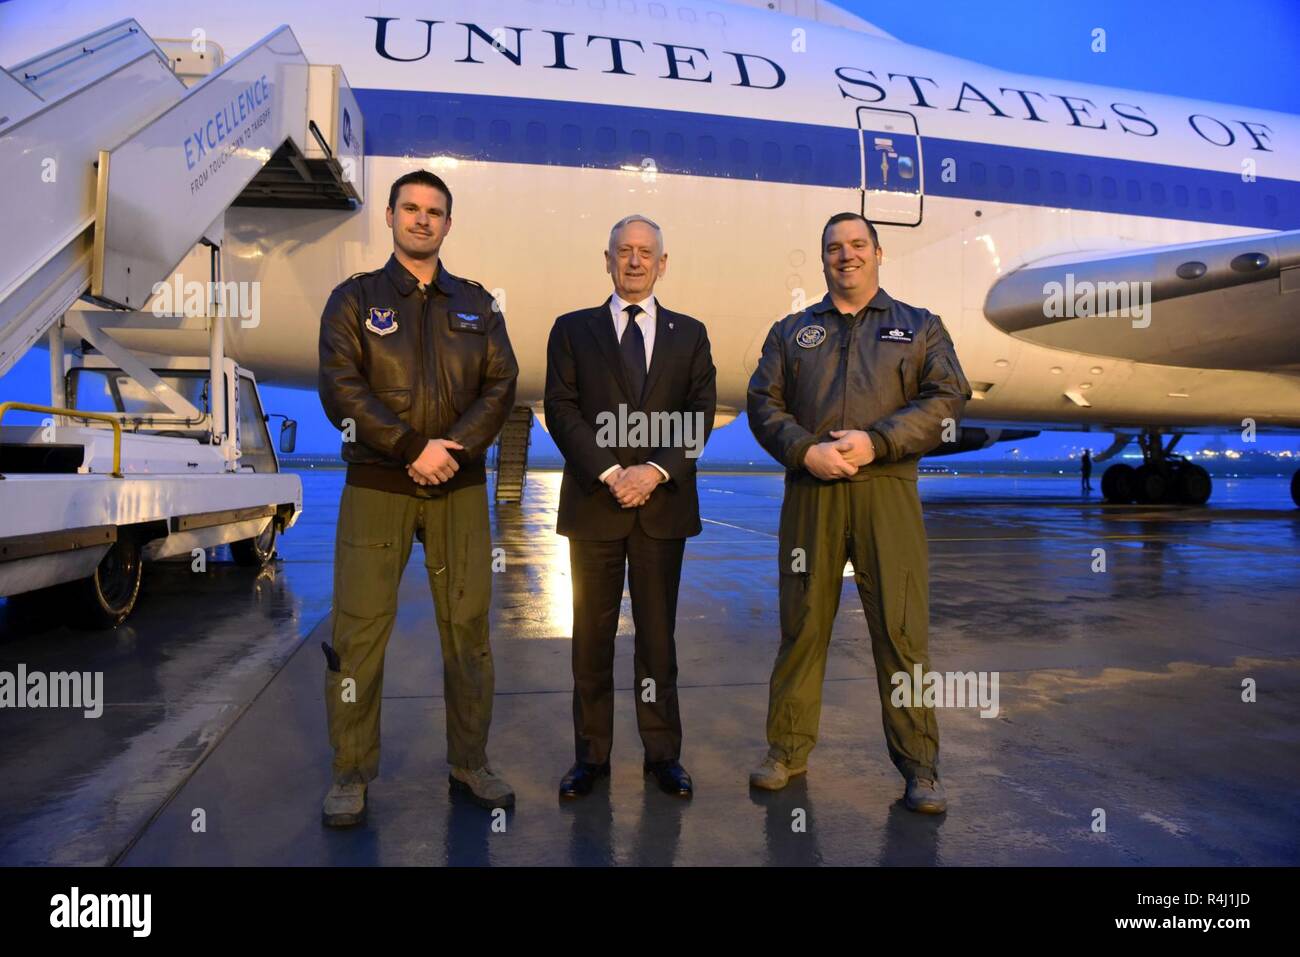 U.S. Secretary of Defense James N. Mattis greets air crew members and thanks them for their service, at the conclusion of his visit to Prague, Czech Republic, Oct. 28, 2018. (DOD Stock Photo